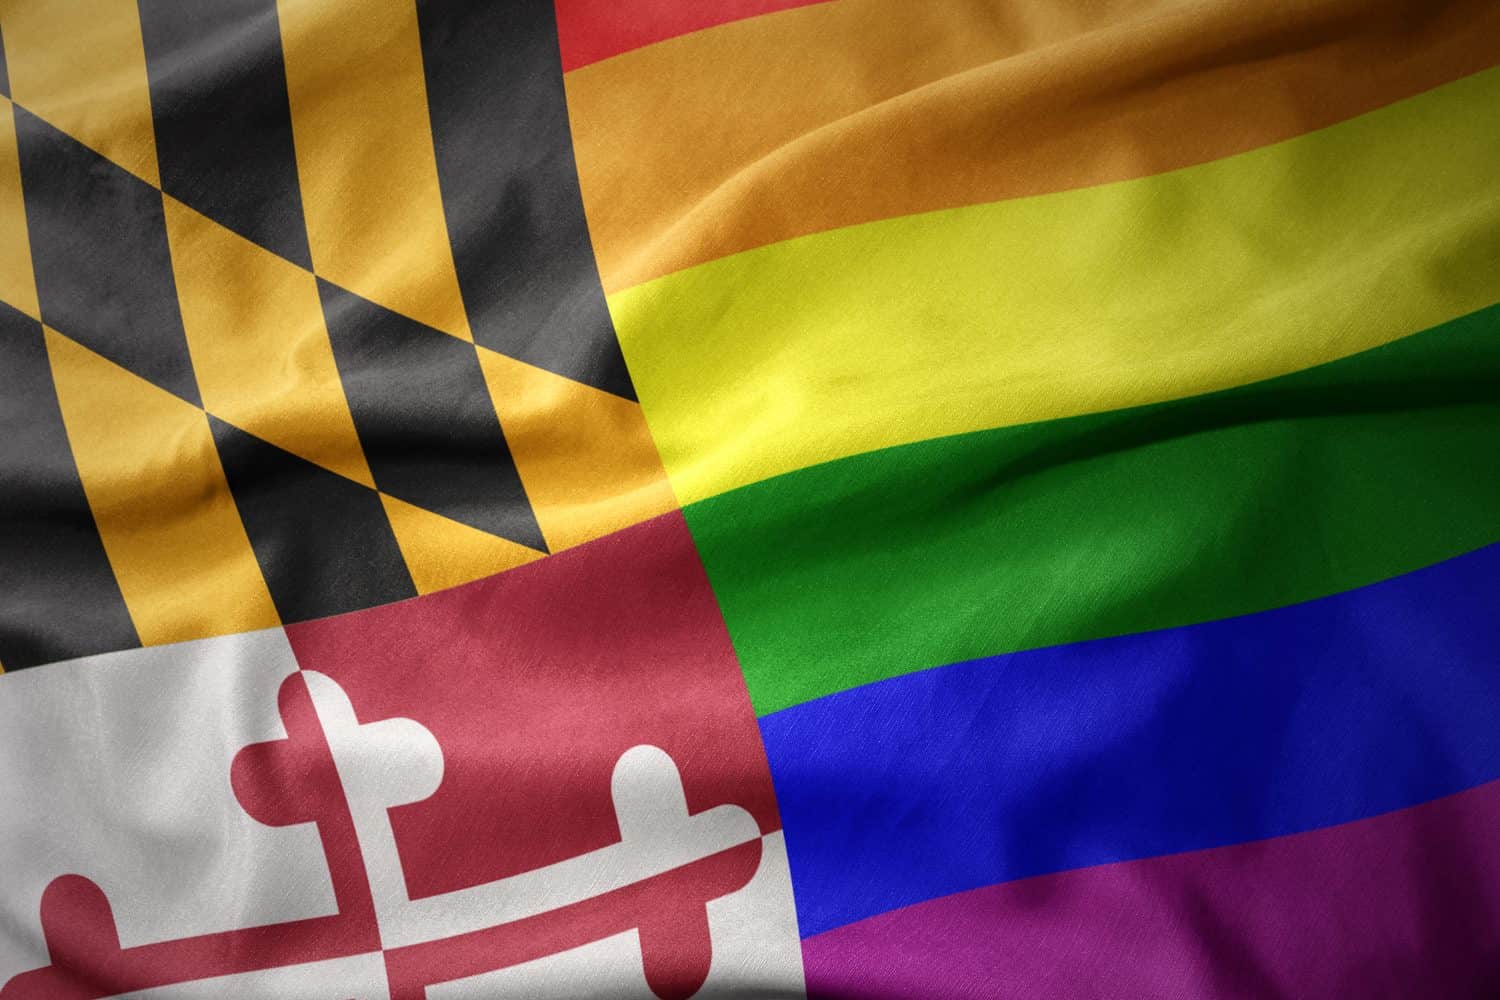 waving maryland state colorful rainbow gay pride flag banner